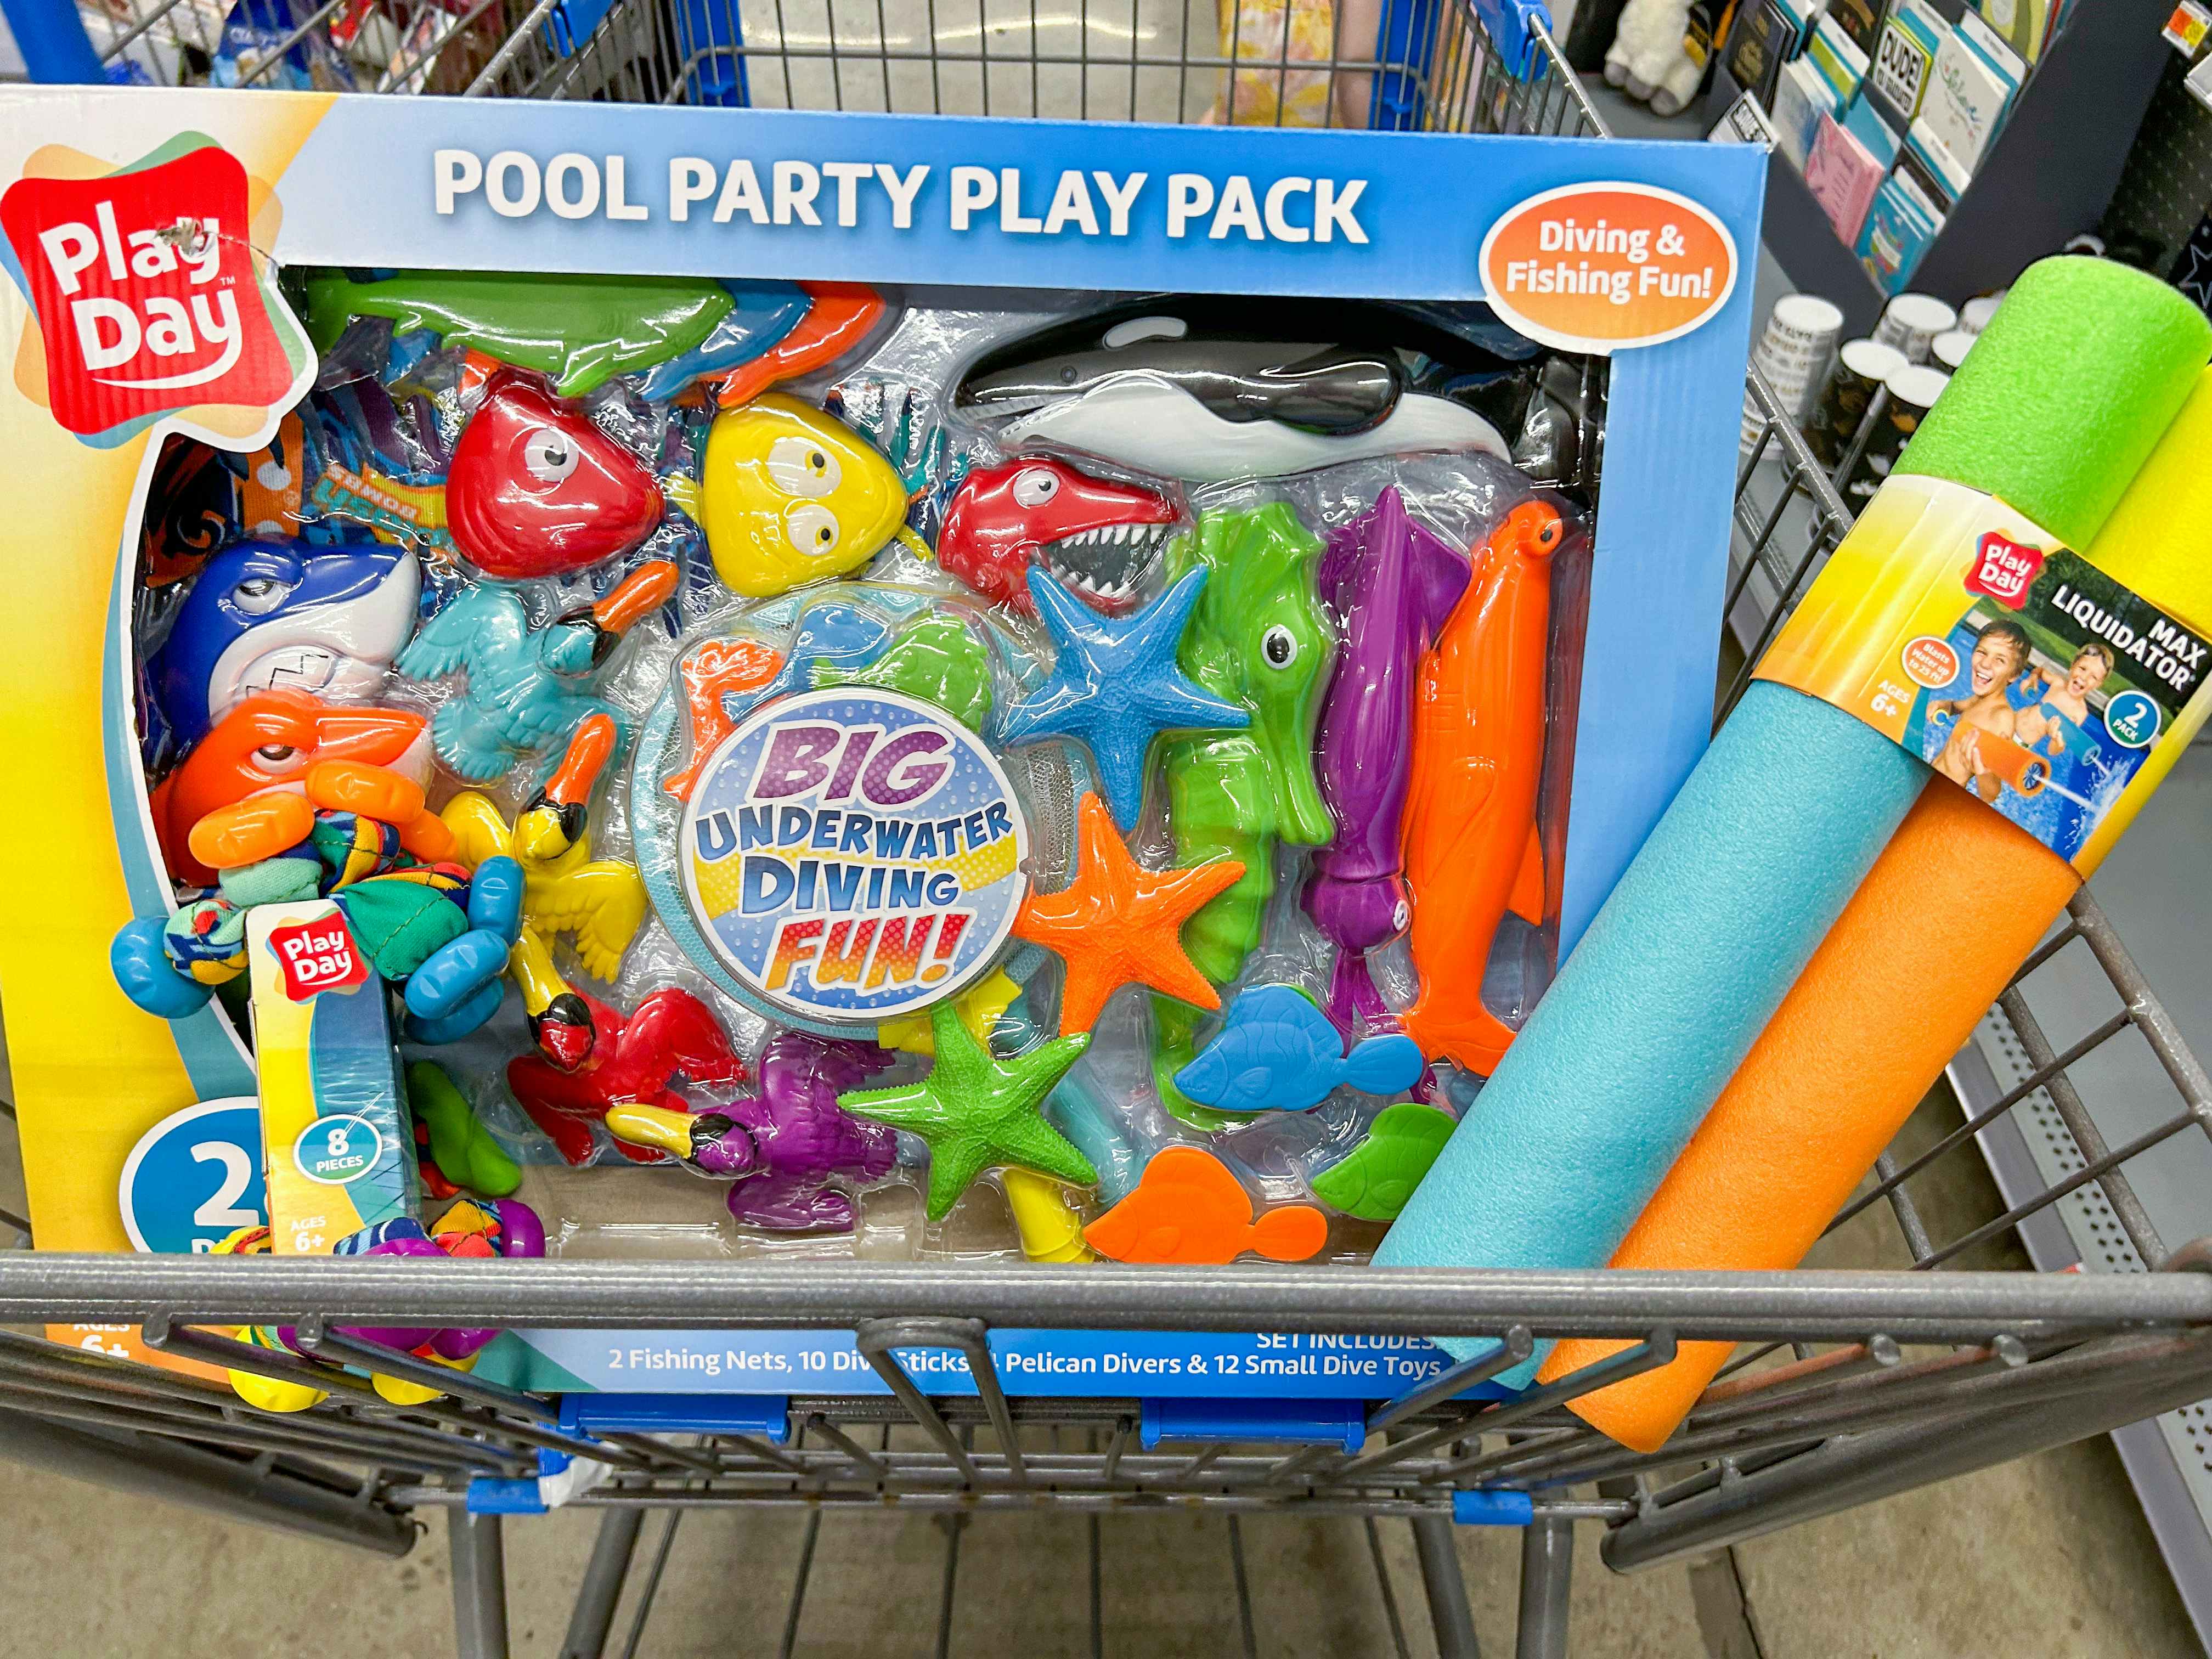 Walmart summer finds pool party play pack in a shopping cart